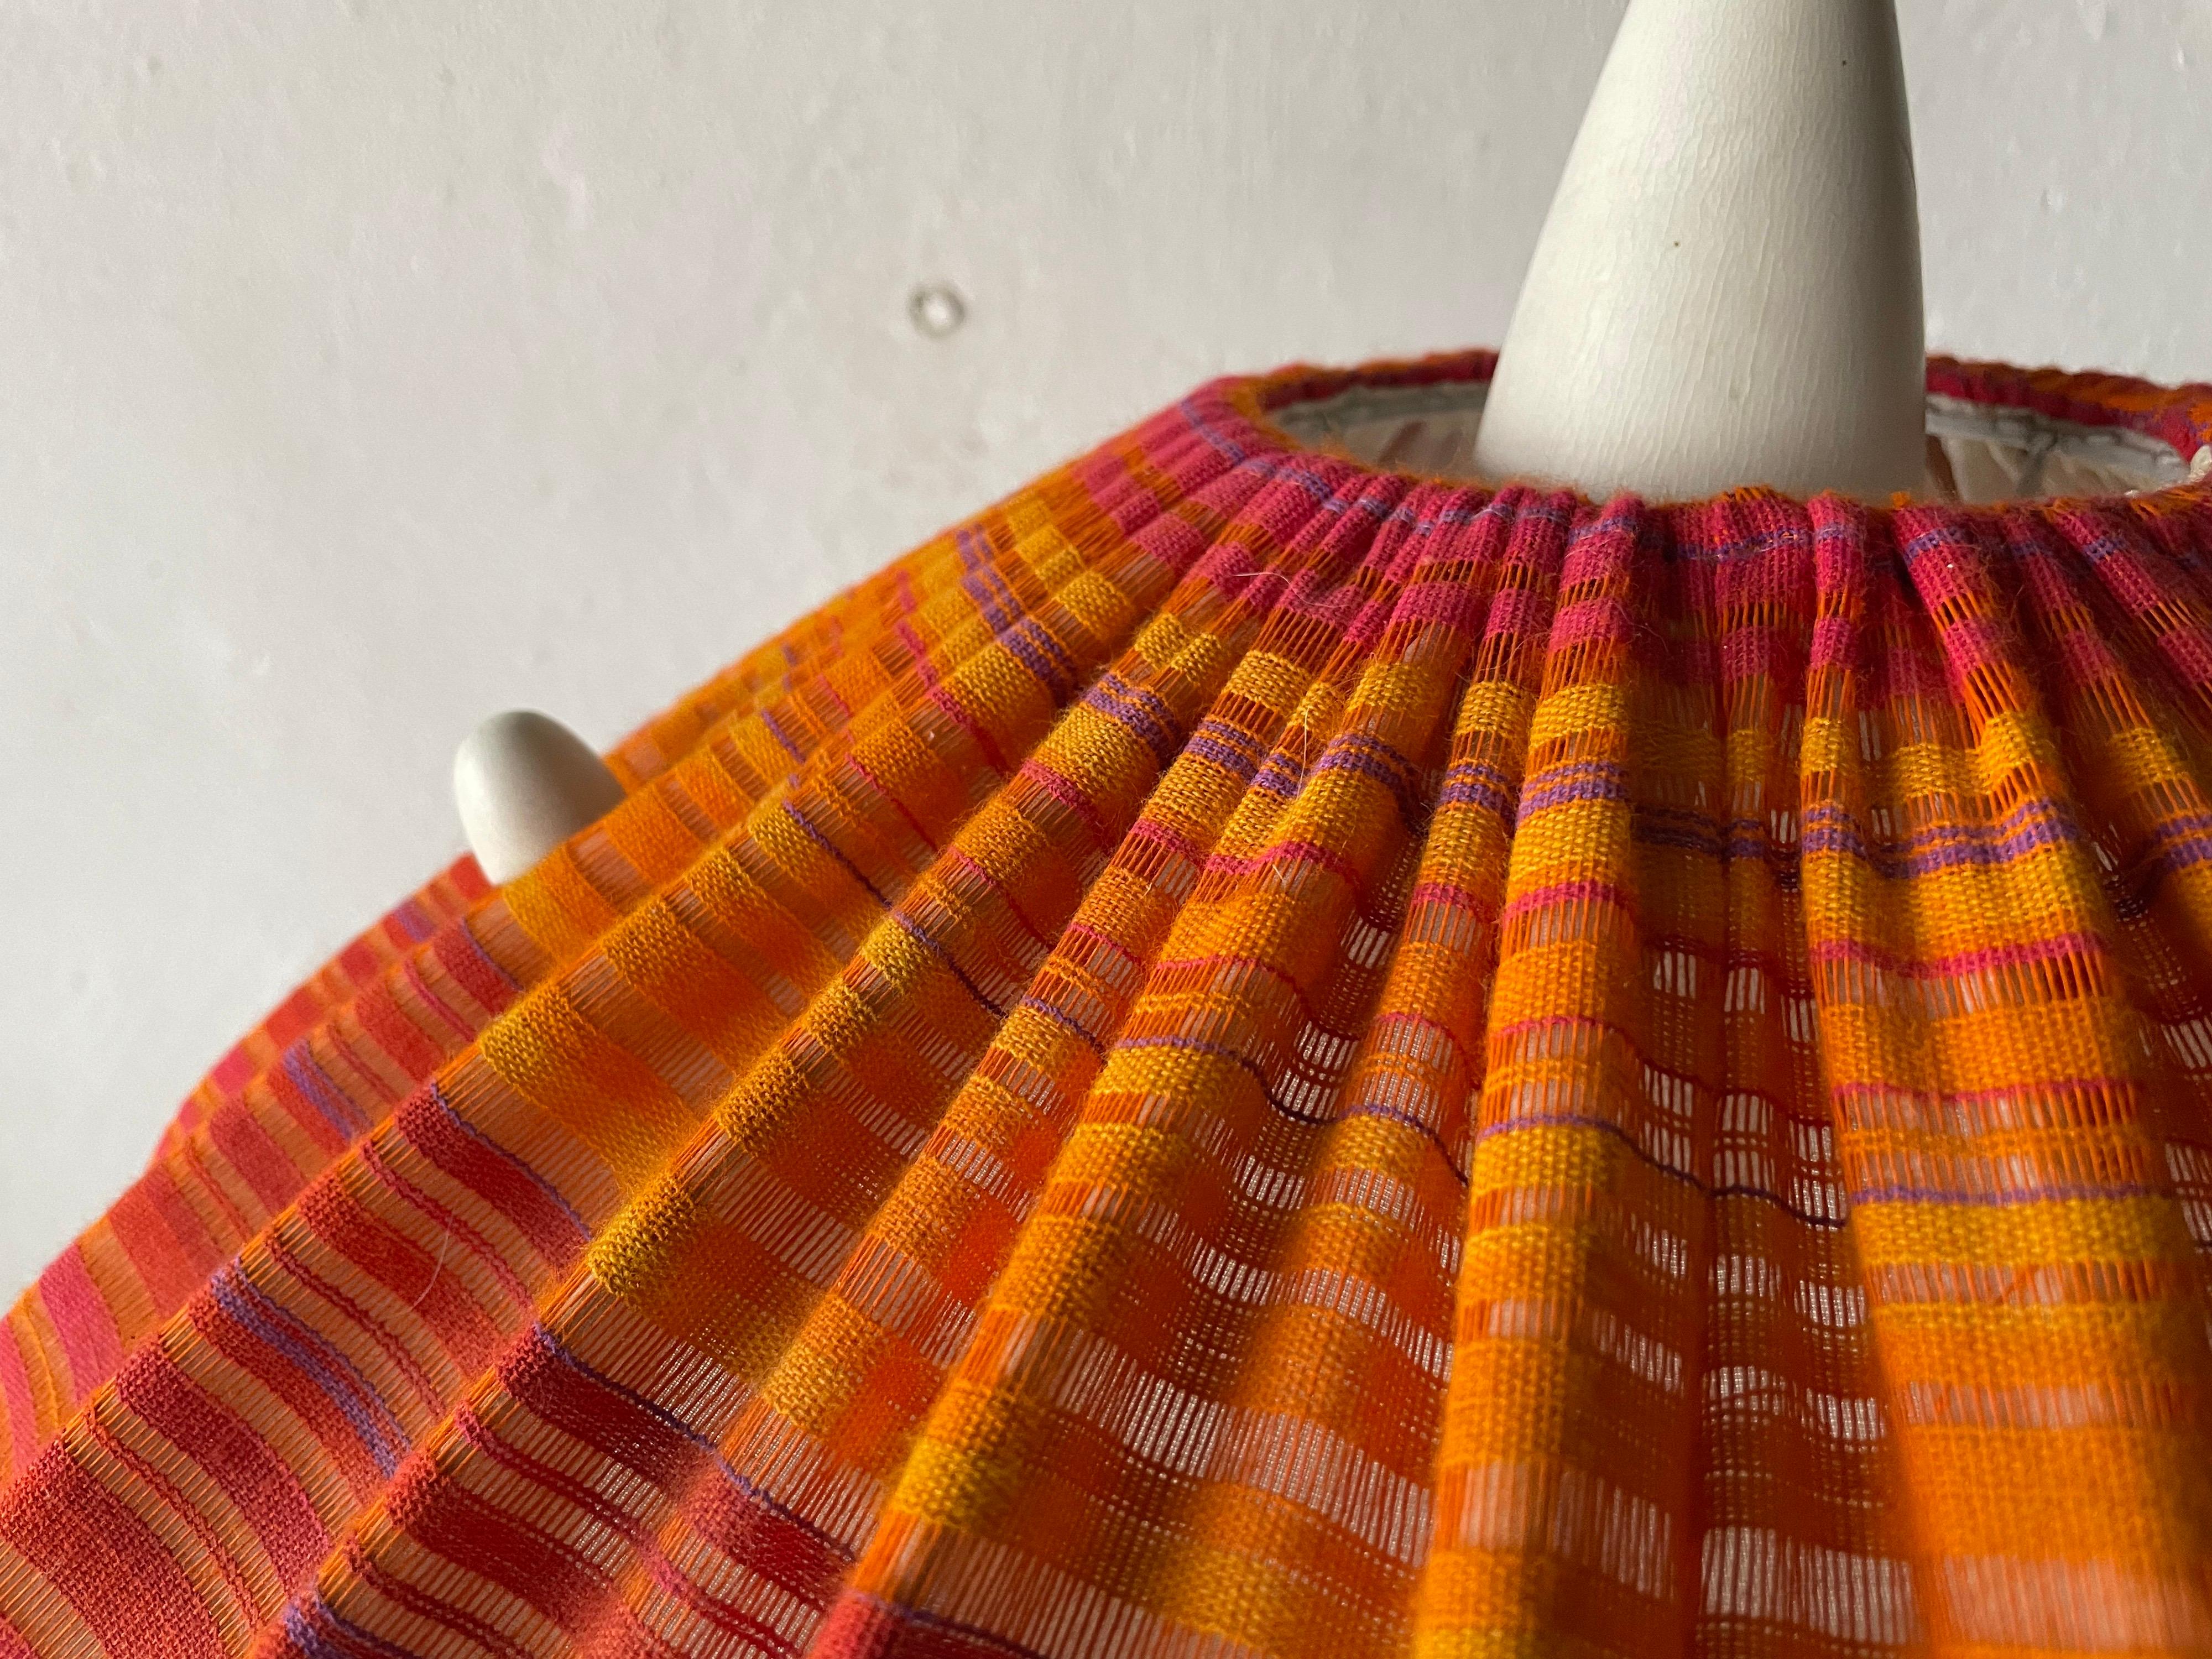 Fabric Shade & Wood Large Pendant Lamp by Temde, 1960s, Germany For Sale 3